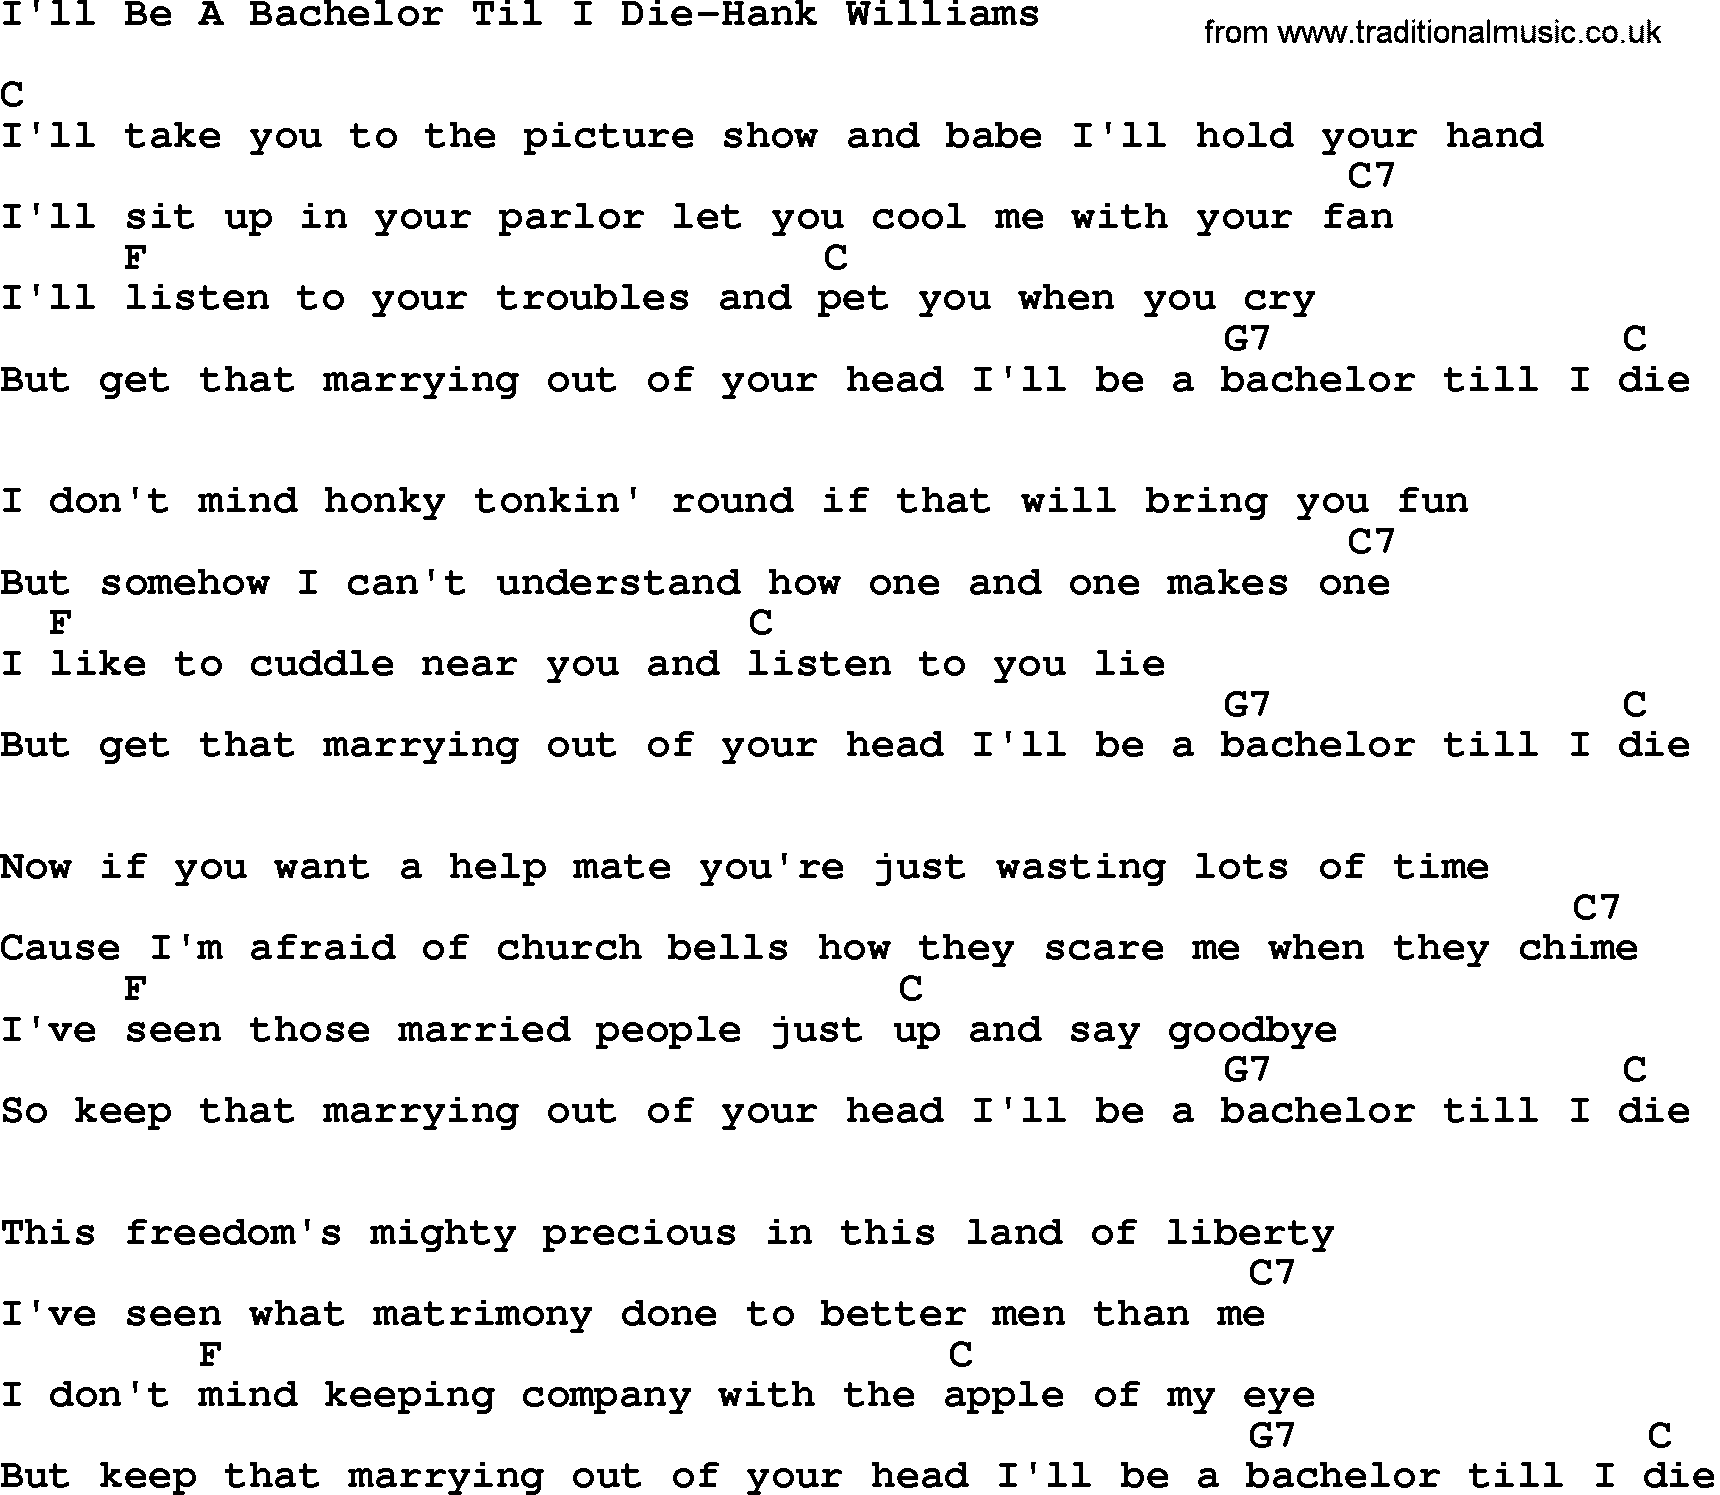 Country music song: I'll Be A Bachelor Til I Die-Hank Williams lyrics and chords